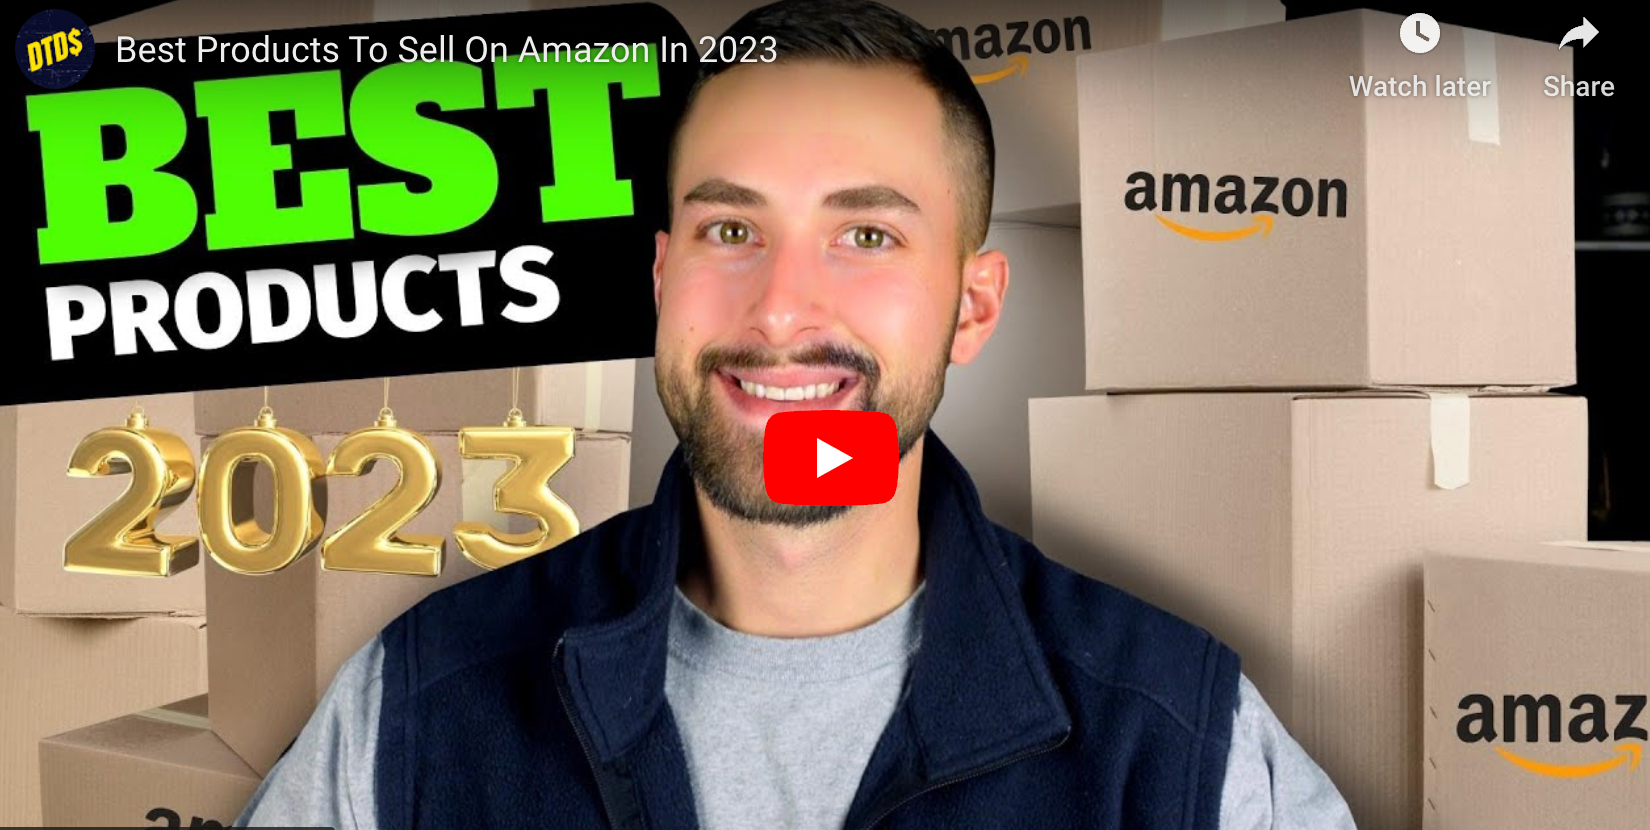 The Future of Online Shopping: Top Selling Products on Amazon in 2023